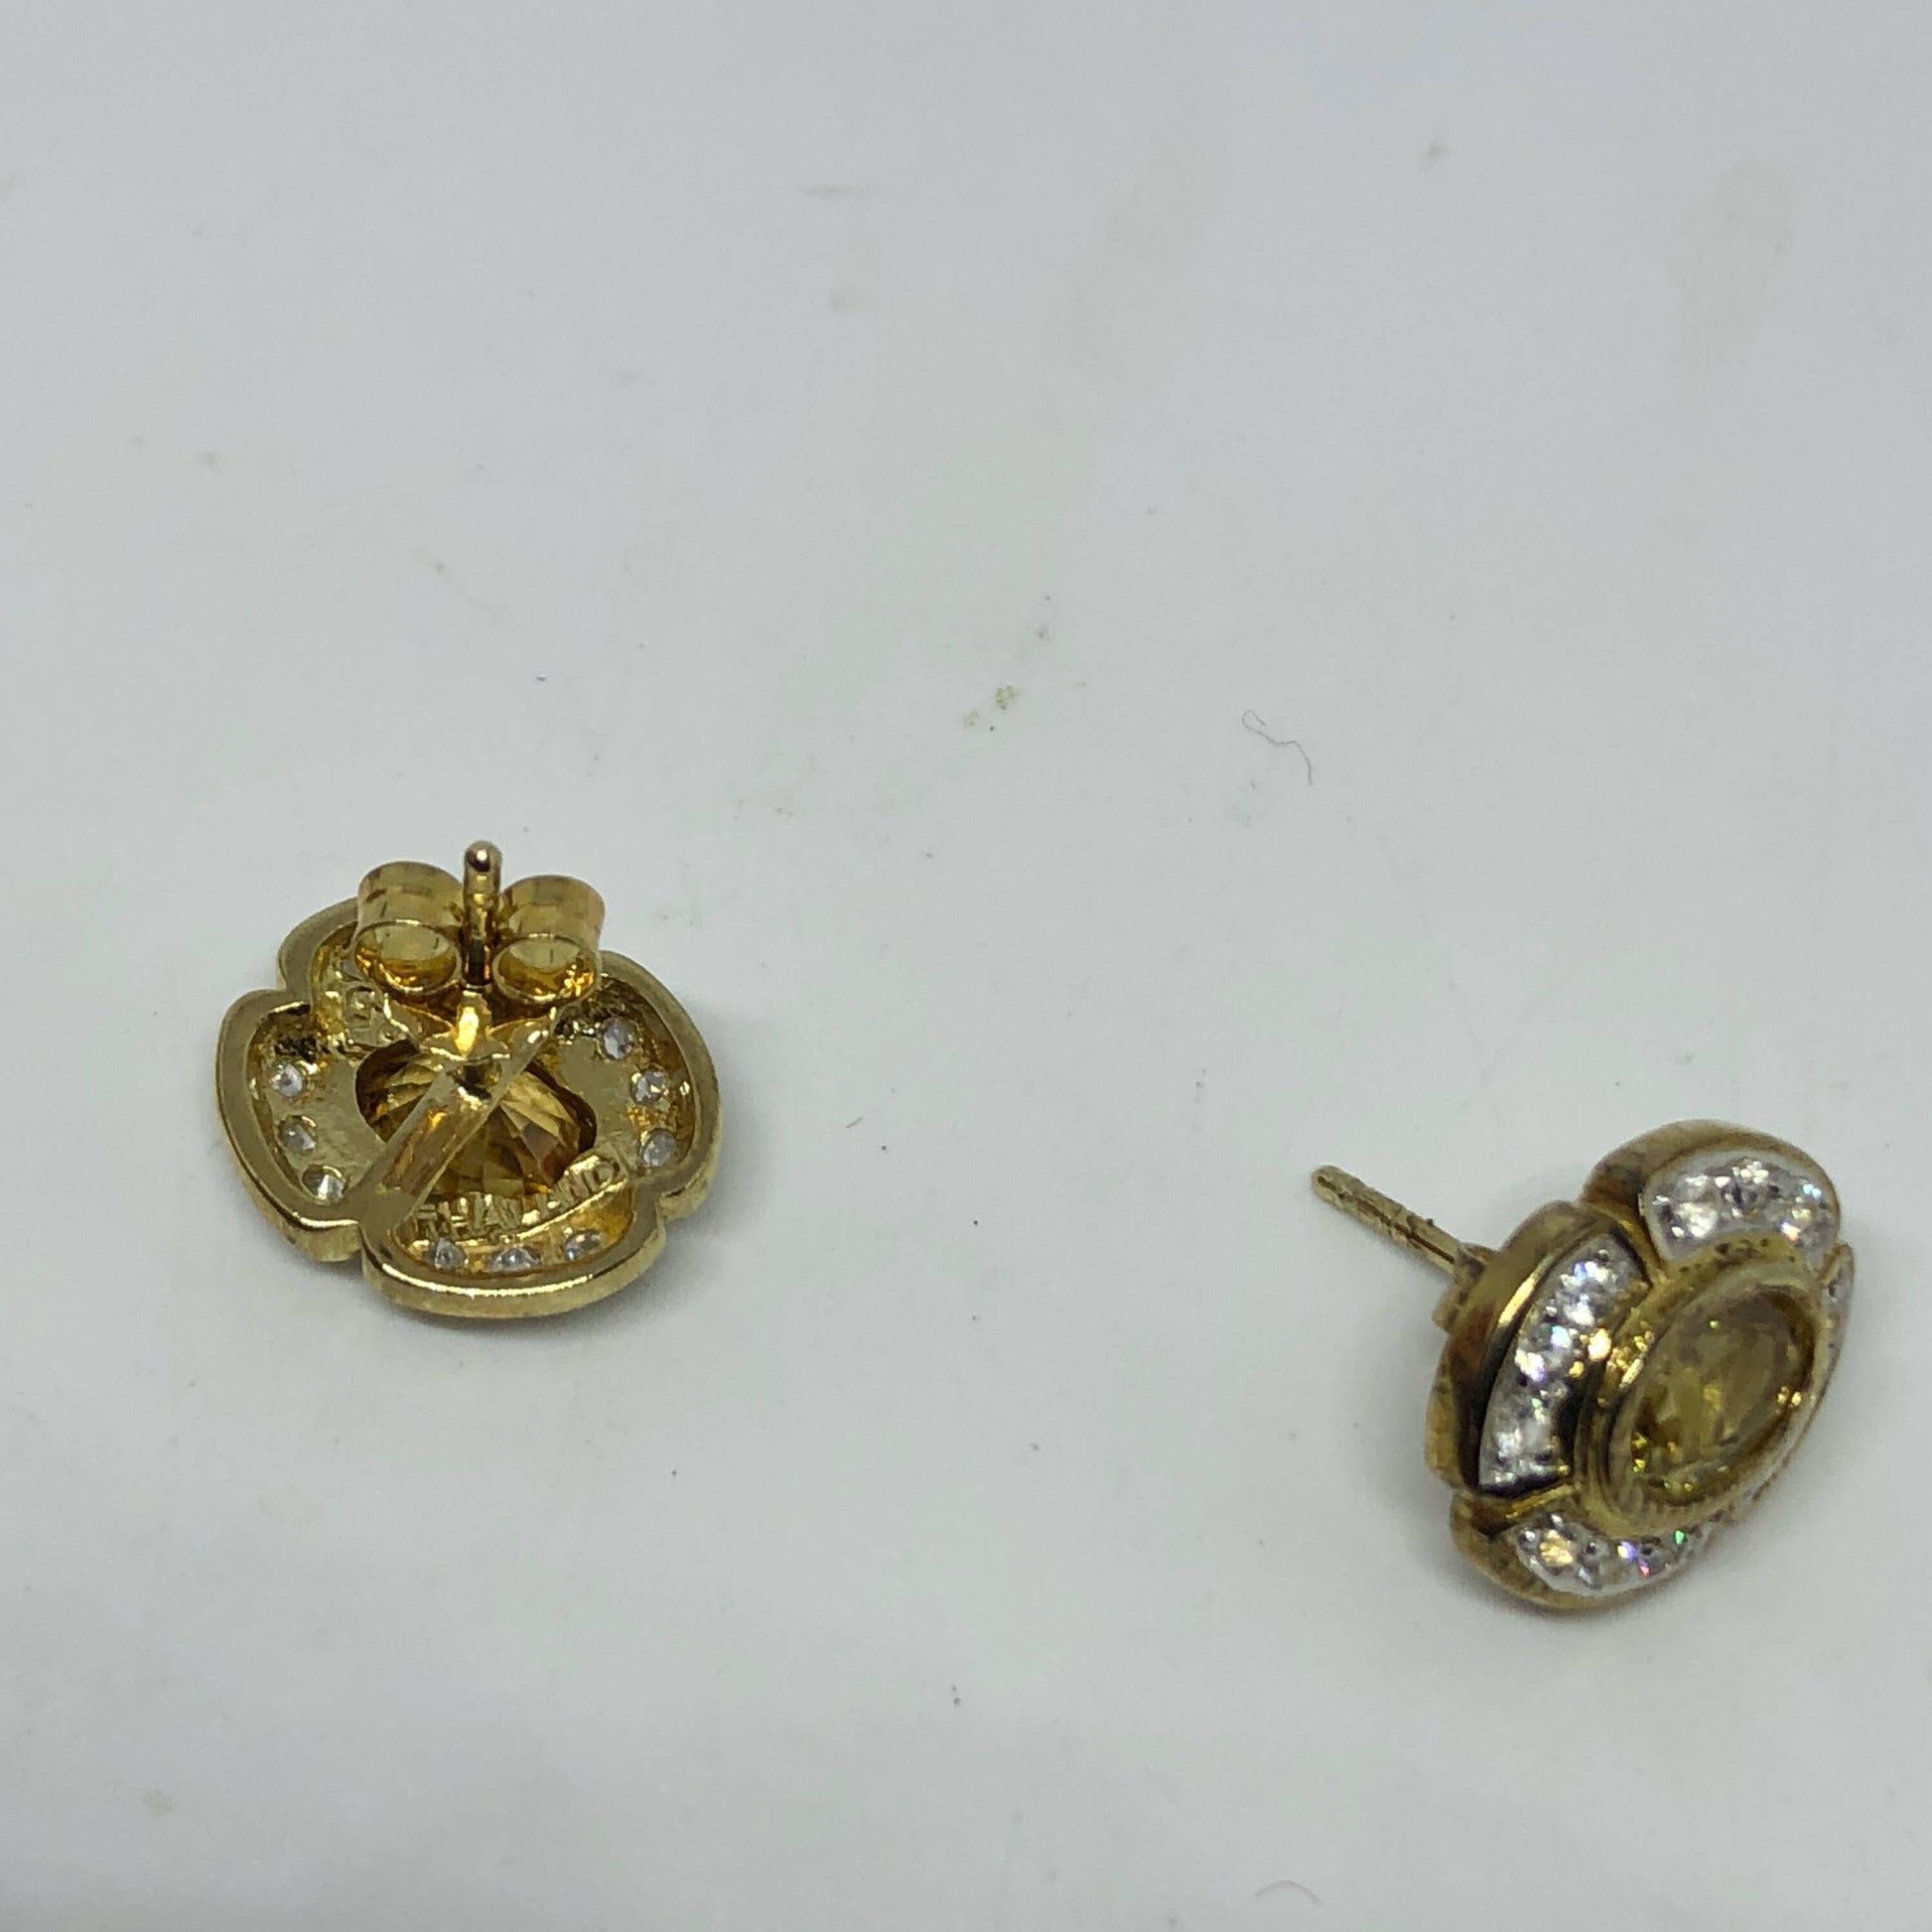 Vintage Citrine Earrings Golden 925 Sterling Silver Deco Studs Button